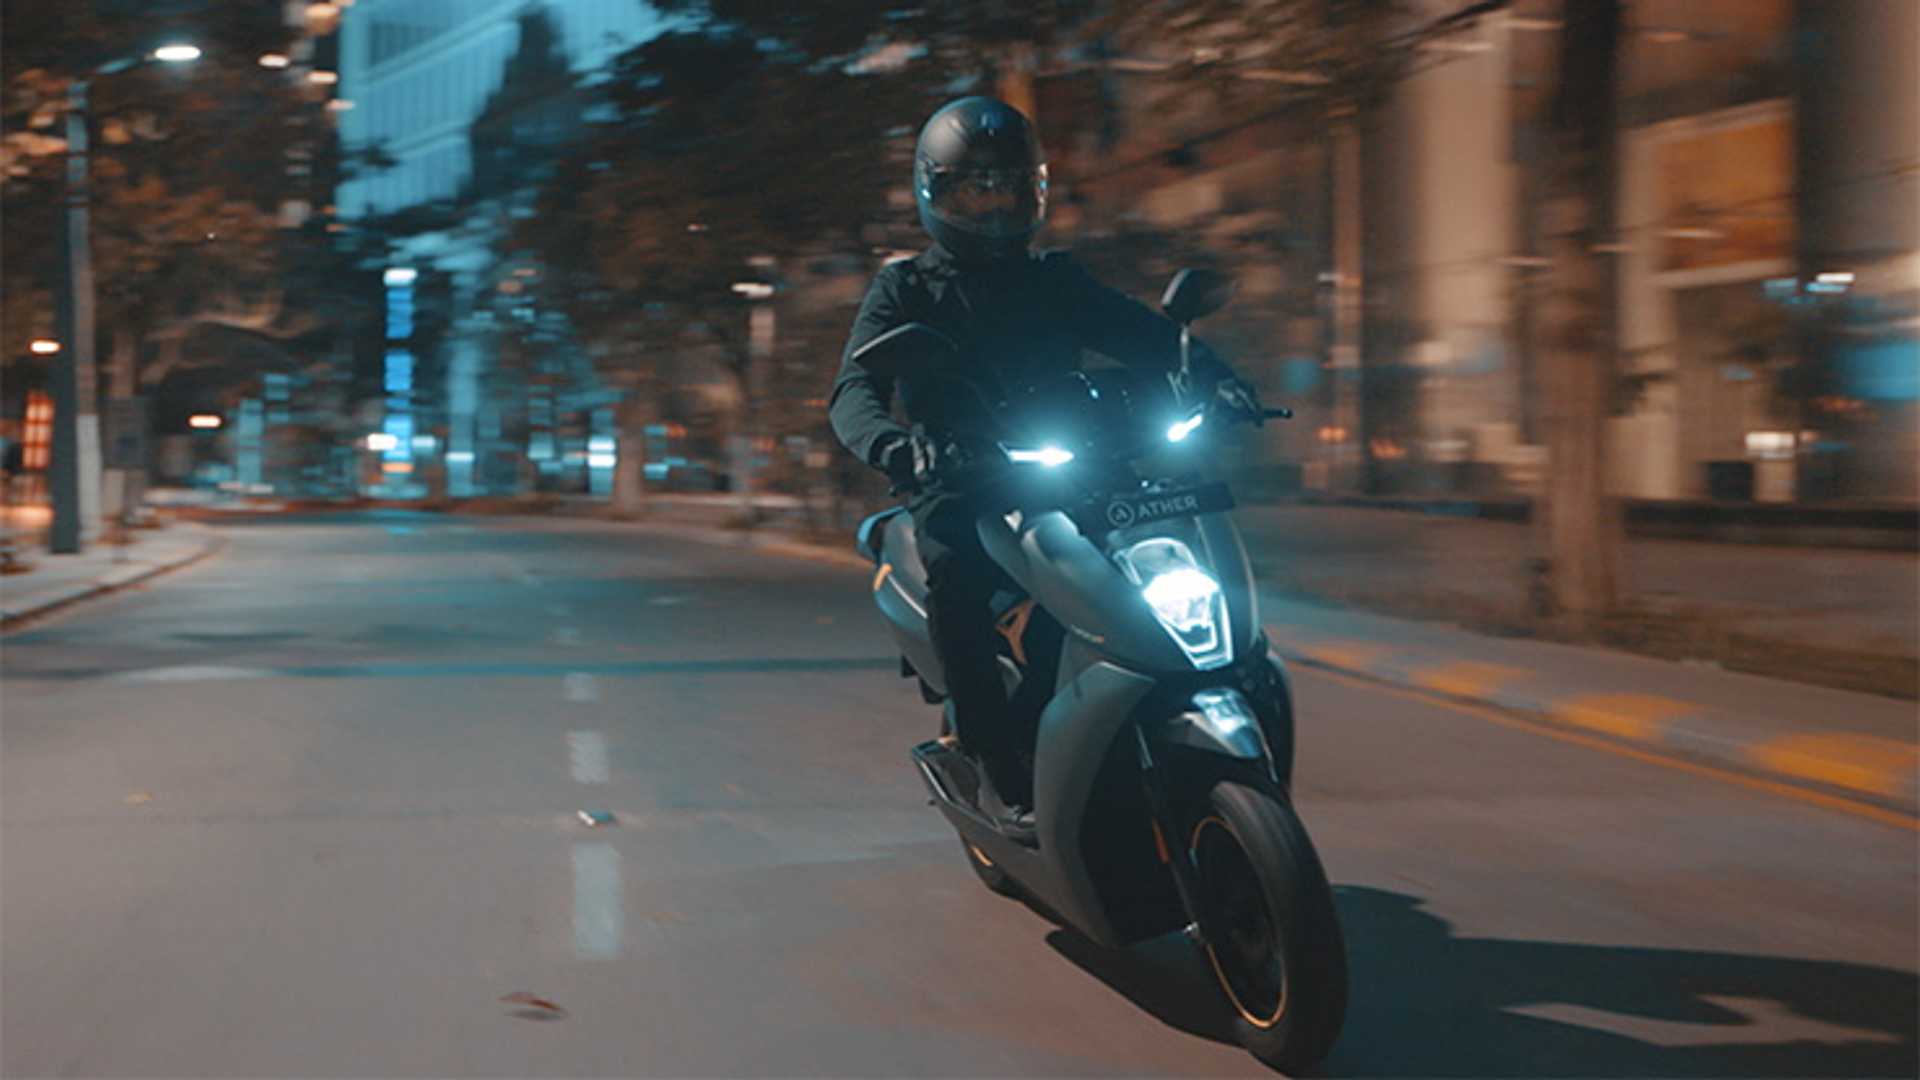 Ahead of the boom in e-scooters in Asia, especially India, Bangalore-based Ather Energy has launched the 450X, which is touted as a premium electric scooter. India's first, after that, Ather raised the bar in terms of model features and performance.  Ather Energy has entered into a $56 million investment in Hero MotoCorp. Ather CEO Tarun Mehta has given Bike Wale an insight into the future of Bike Wale as the label intends to launch a new model with the 450. That is very popular in India to 2 sub-models together.  In India, Ather is selling the 450 Plus and 450X, with the 450X increasing year by year. It is likely that the camp will develop a larger battery for the 450X. and performance that lasts longer than before  Both models will receive a change in the new color scheme. The shape has not changed. but will change in terms of higher efficiency itself In the meantime, it is still in the process of development and is expected to be ready to be released in late 2022 or early 2023 for sure. Ather's most popular model, the 450X, is priced at $1,973, or around 66,500 baht, which does not include local import duties.